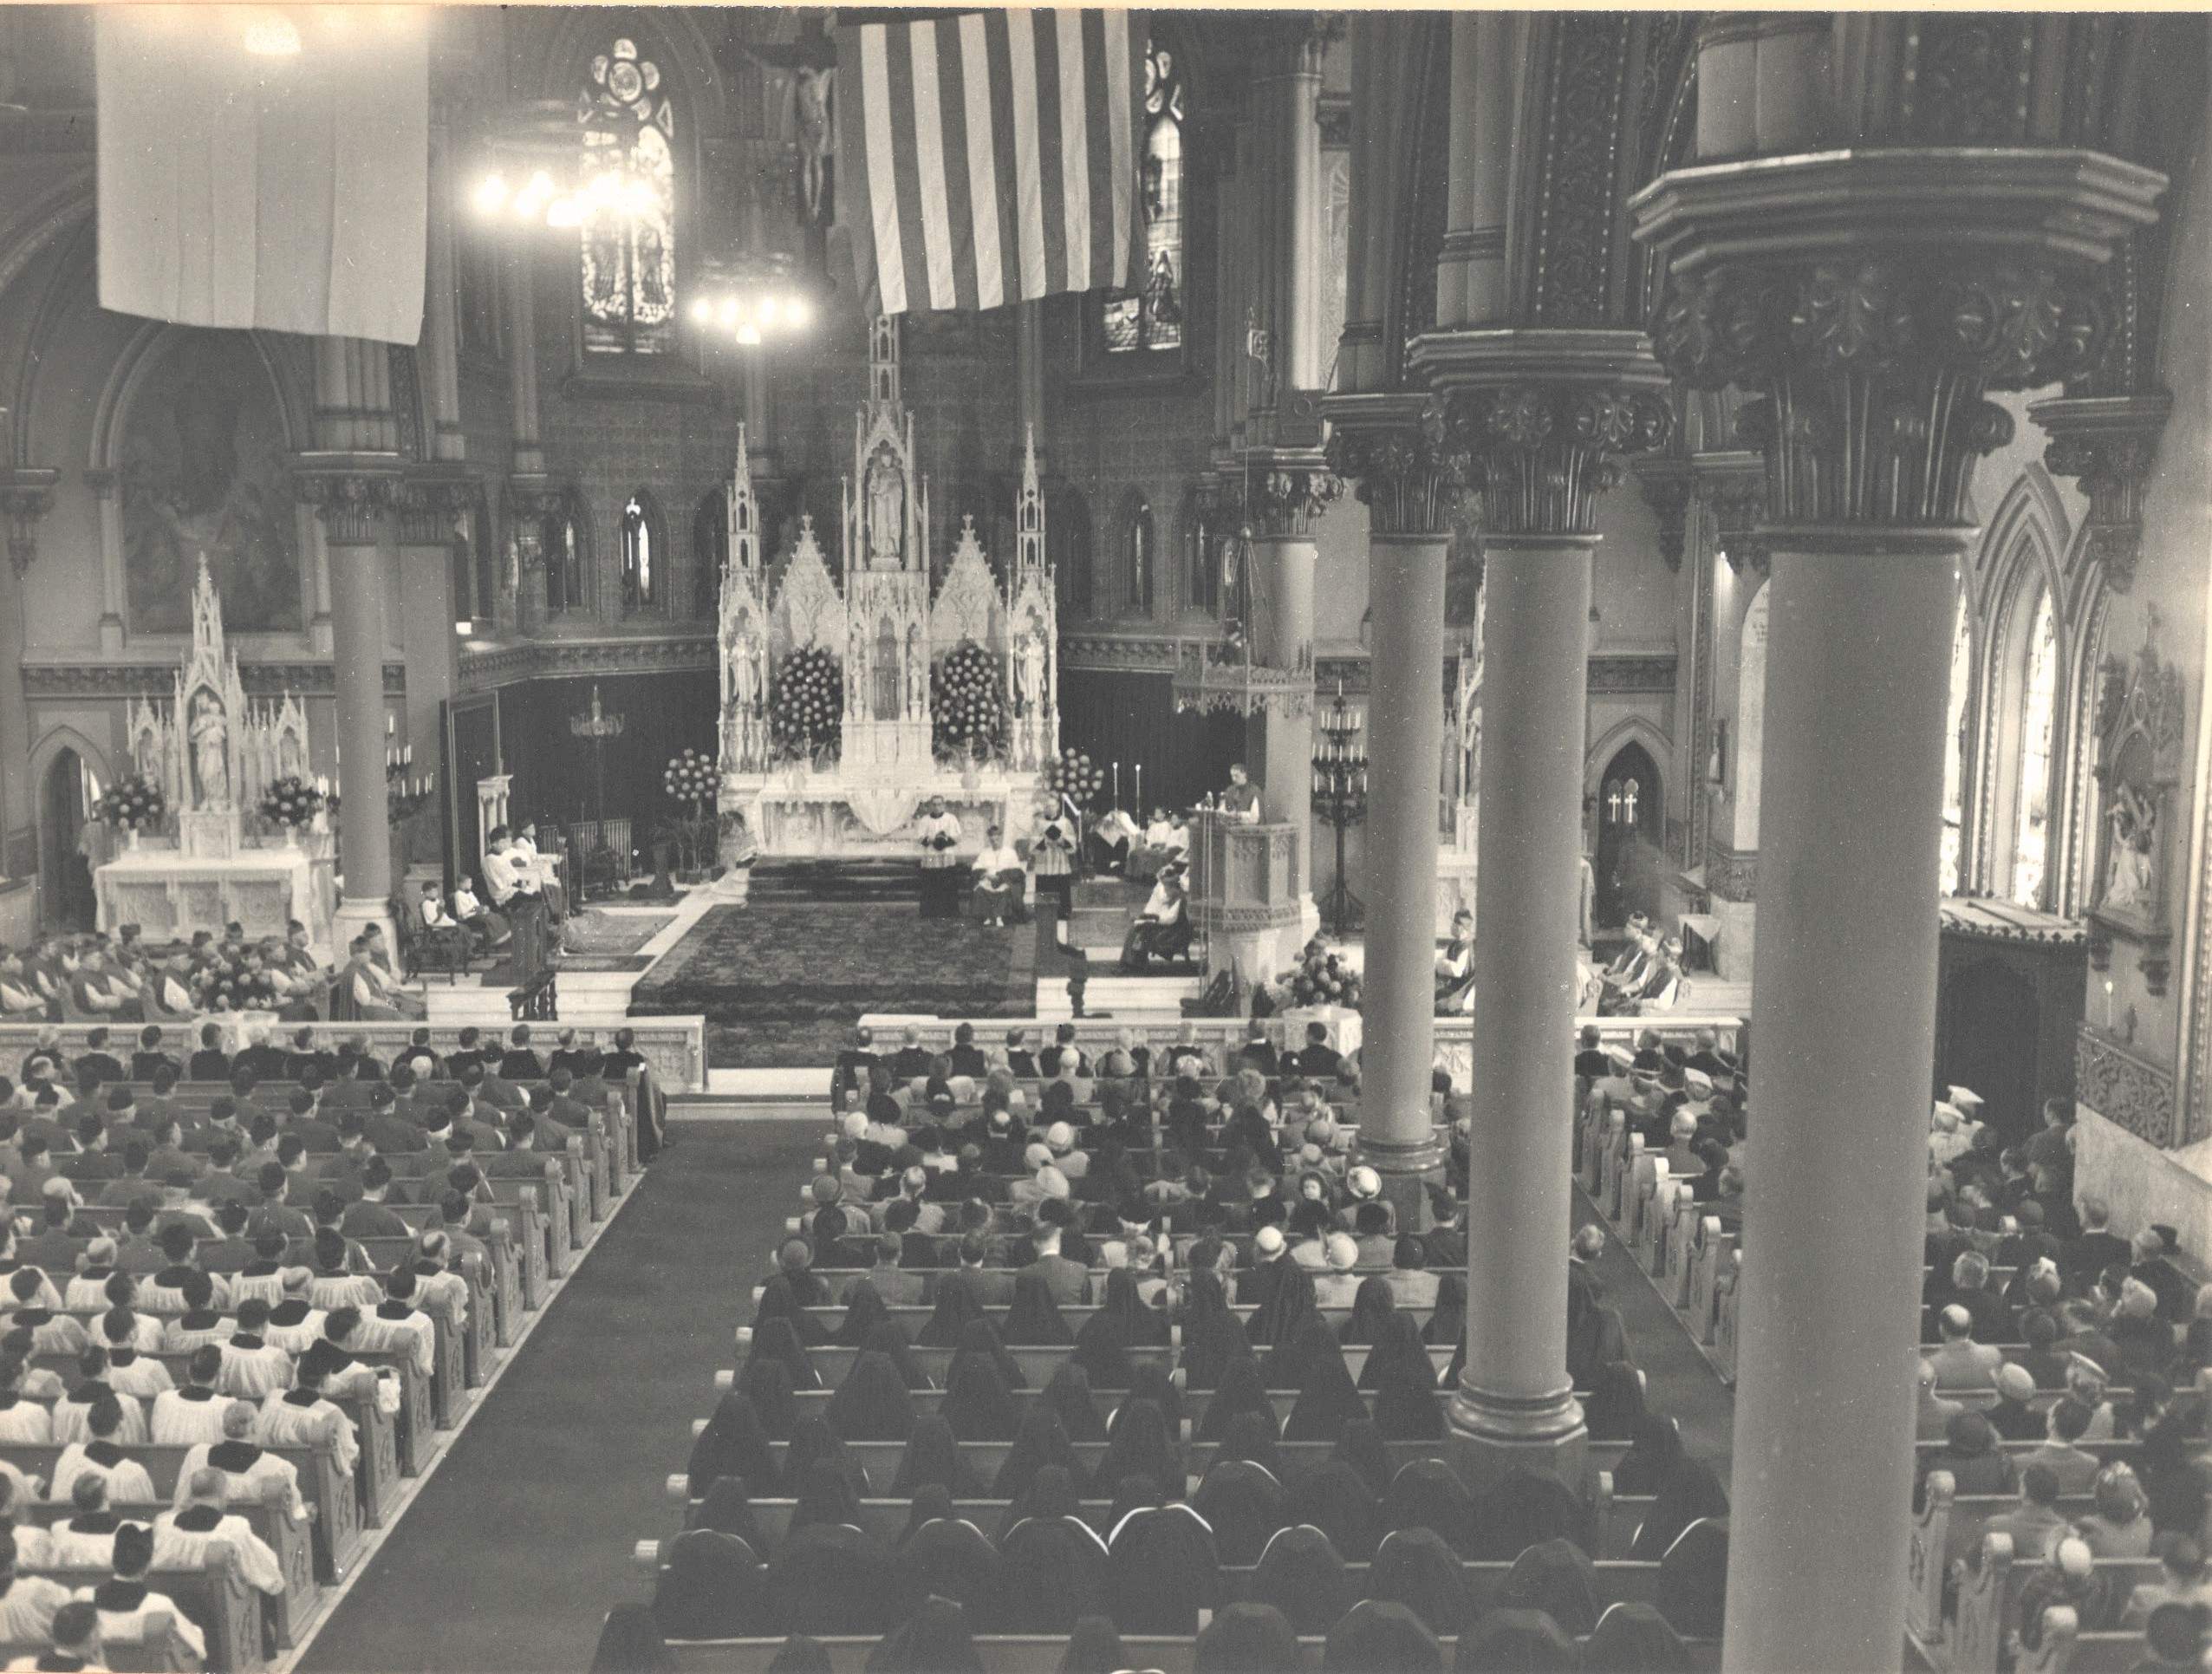 A full St. Columba Cathedral circa 1943.